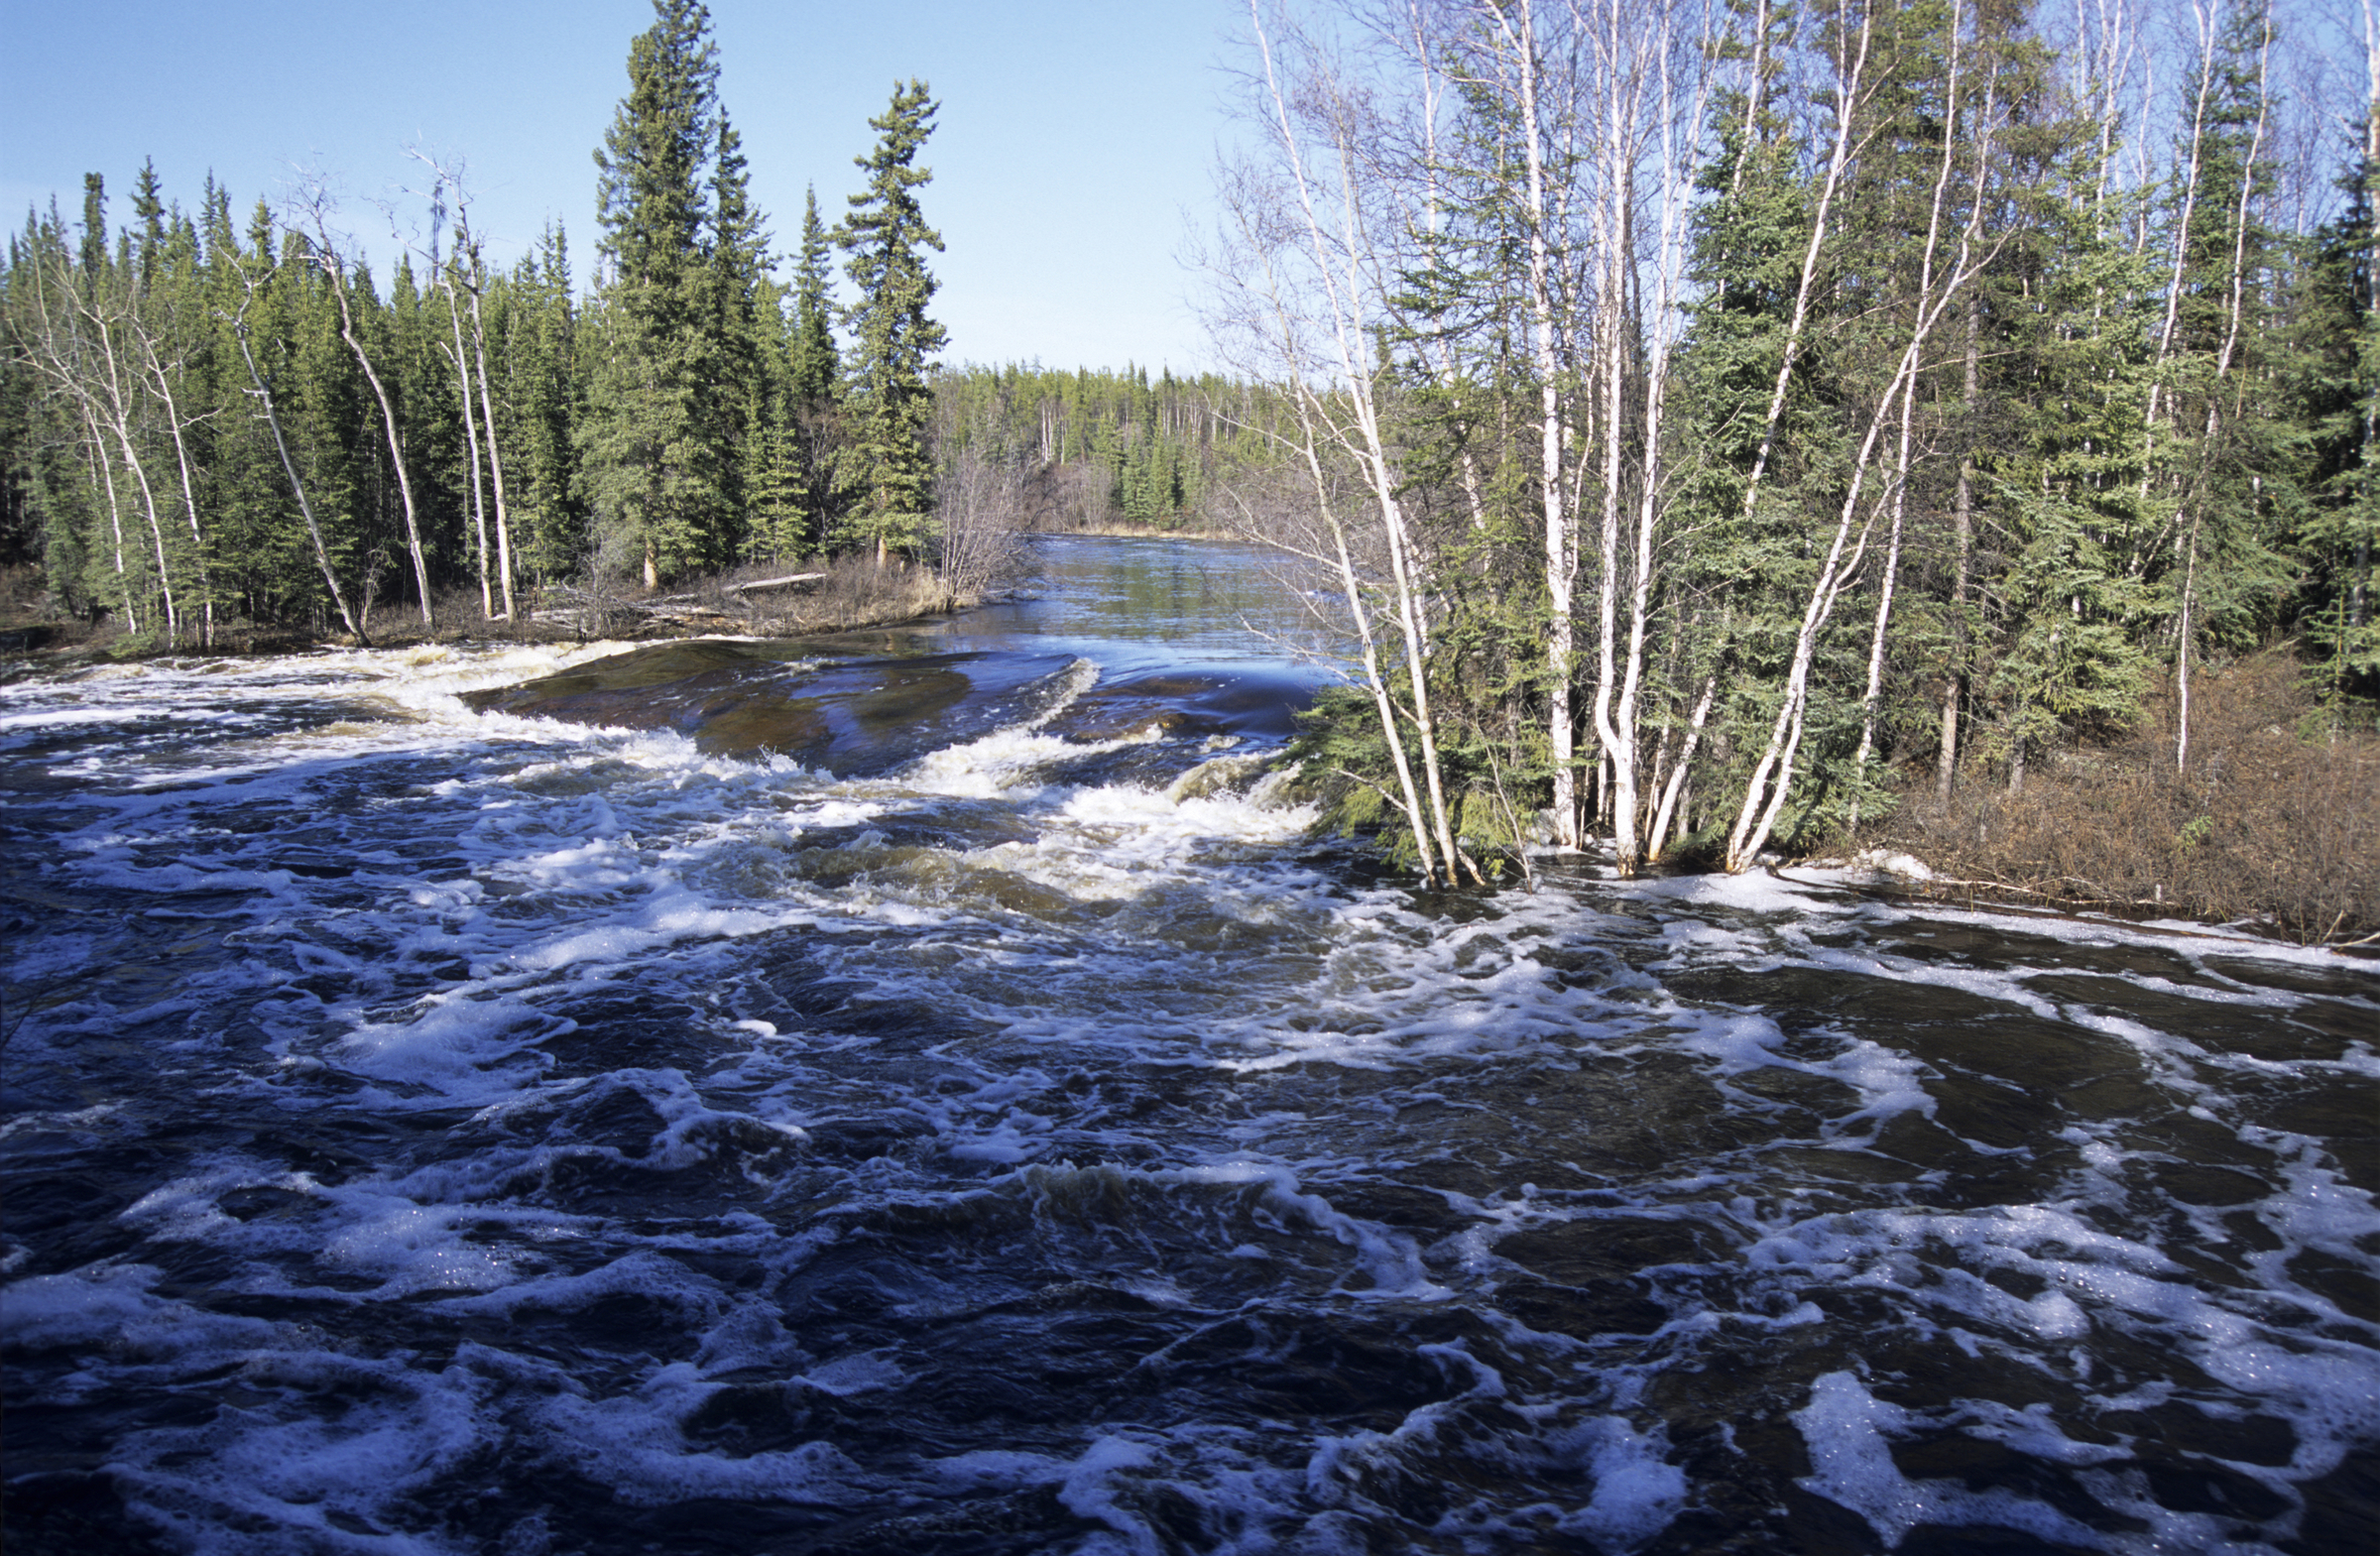 Boundary Creek flows through the forest in the  Northwest Territories, Canada.